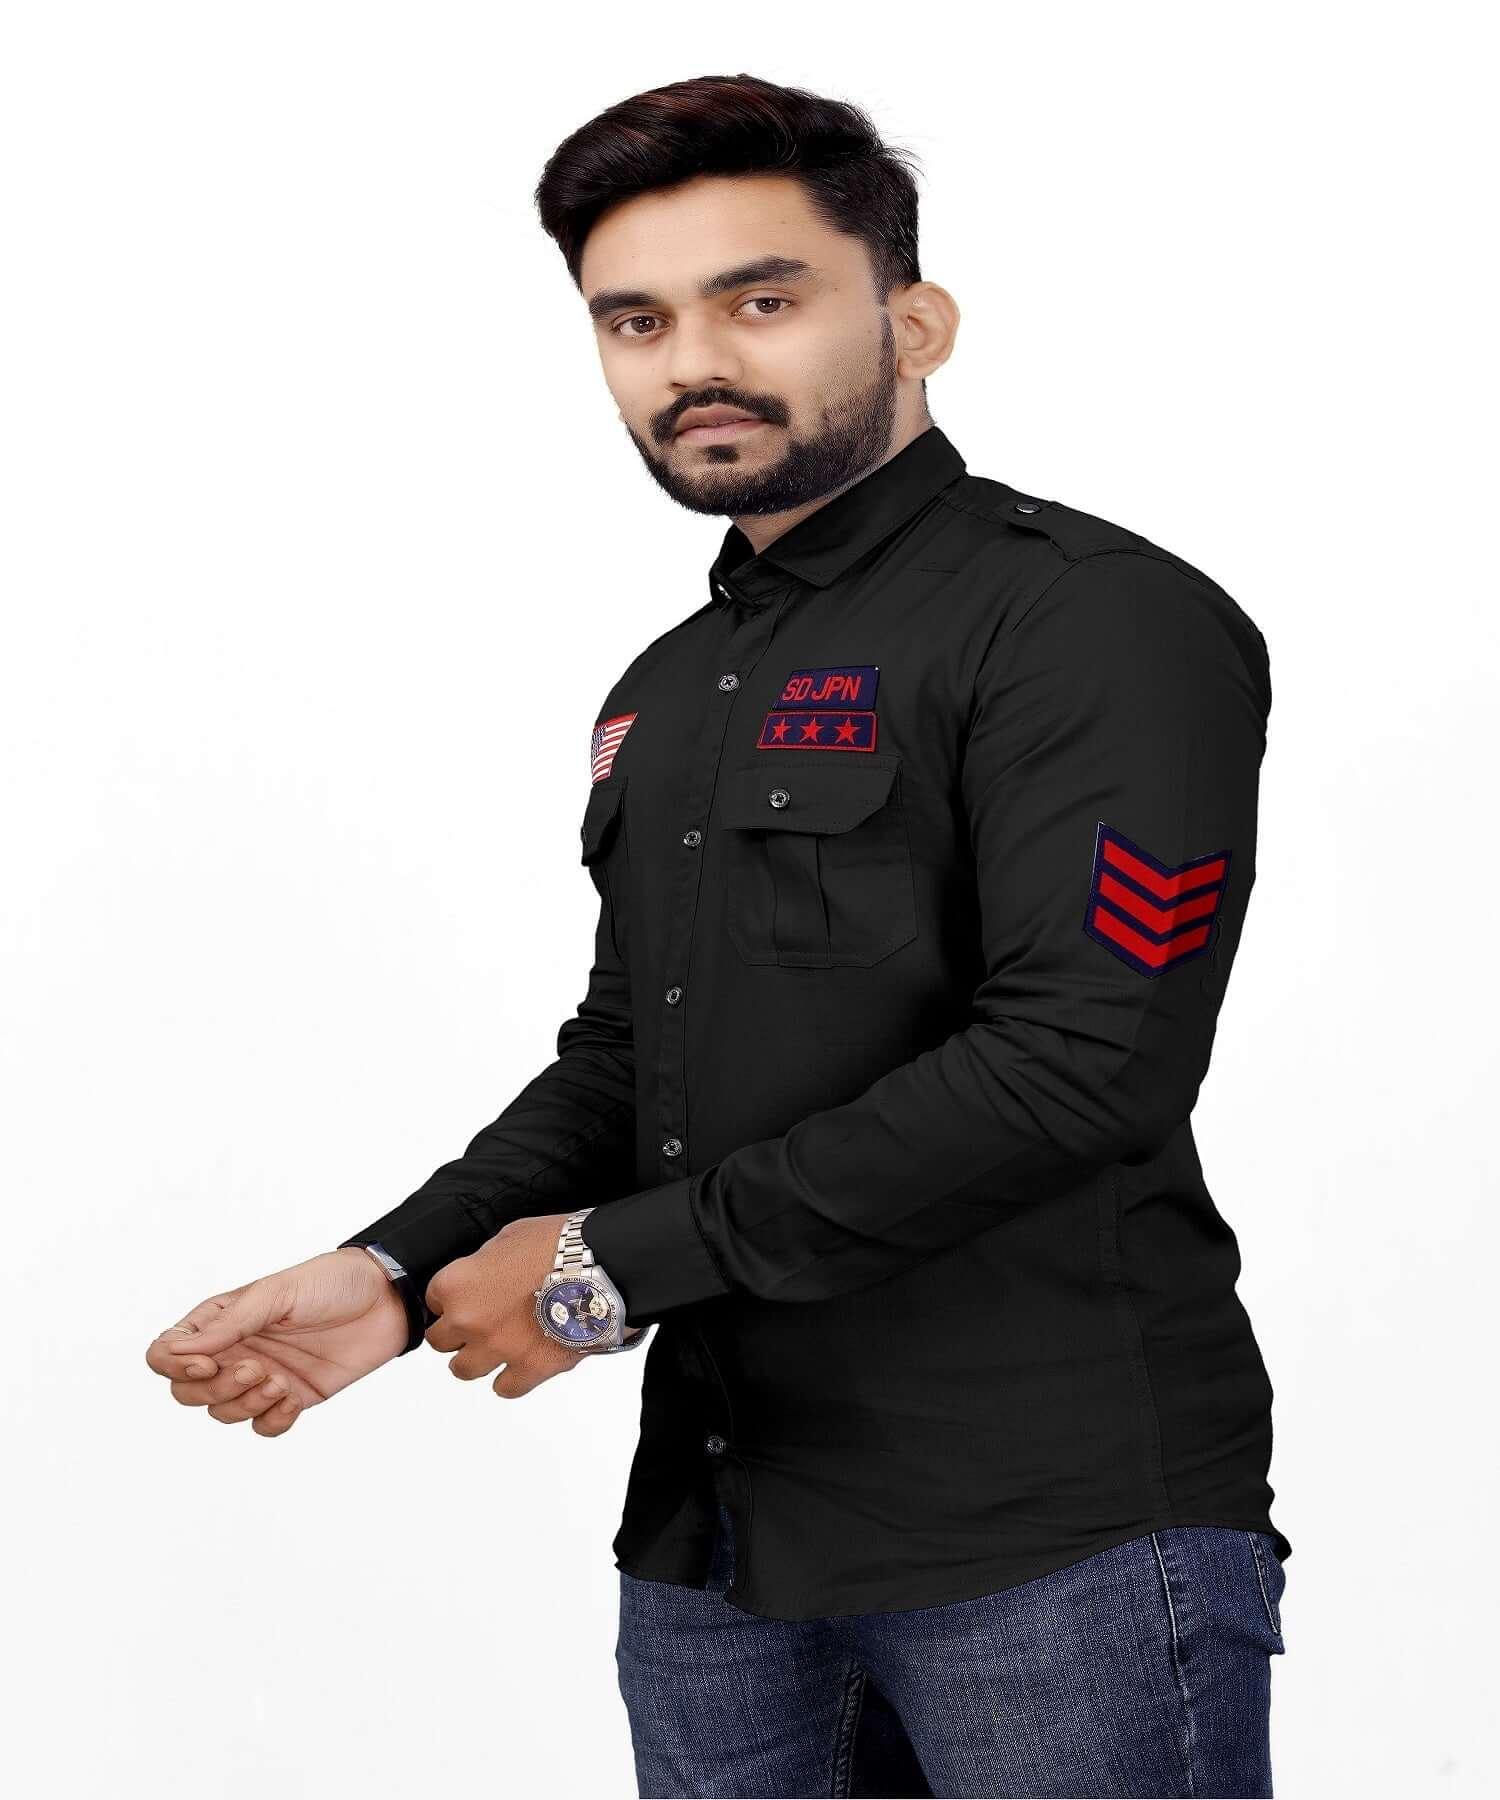 Casual 100% Cotton Two Pocket With Logo Full Sleeve Shirt for Men's Black - UD FABRIC - Your Style our Design